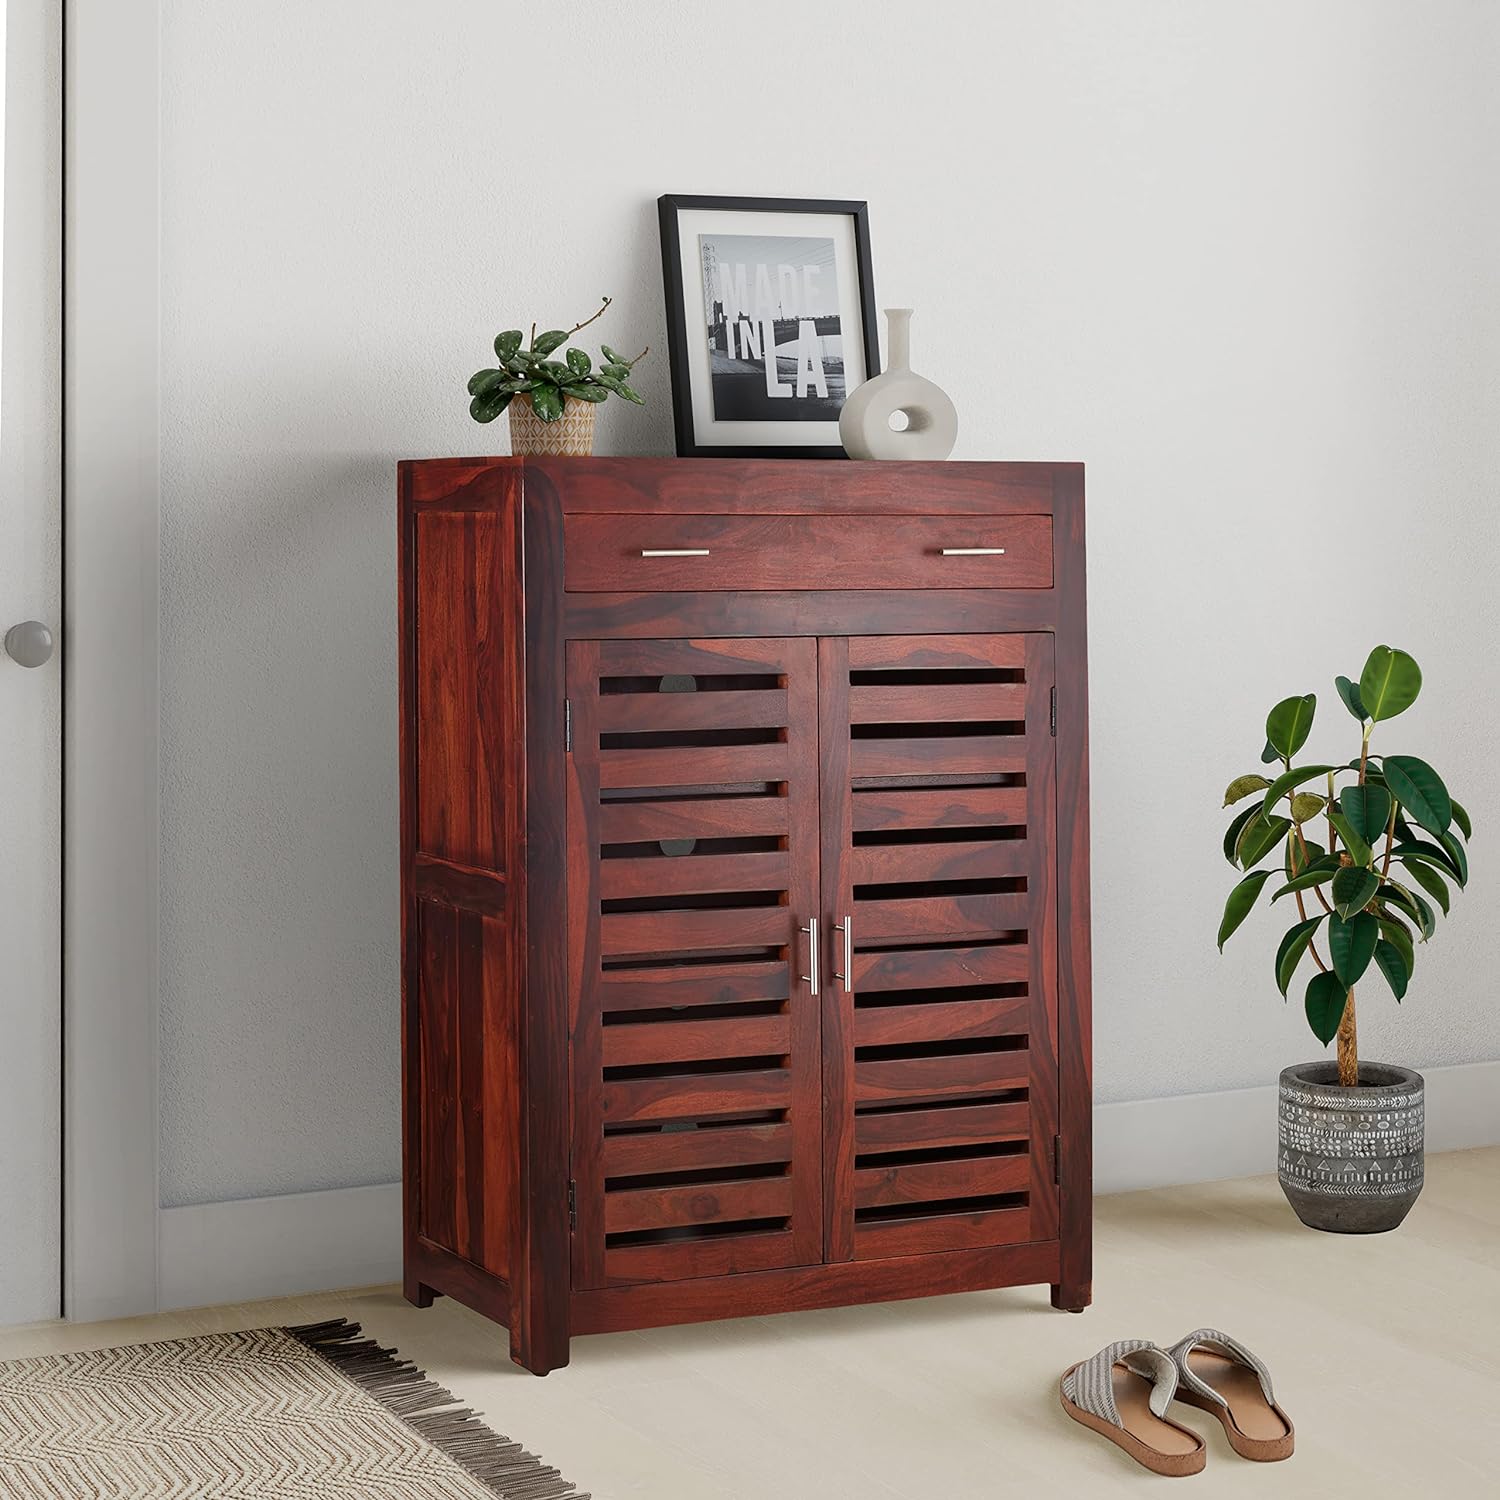 Mondsee Solid Sheesham Wood Shoe Rack Cabinet with 2 Drawers